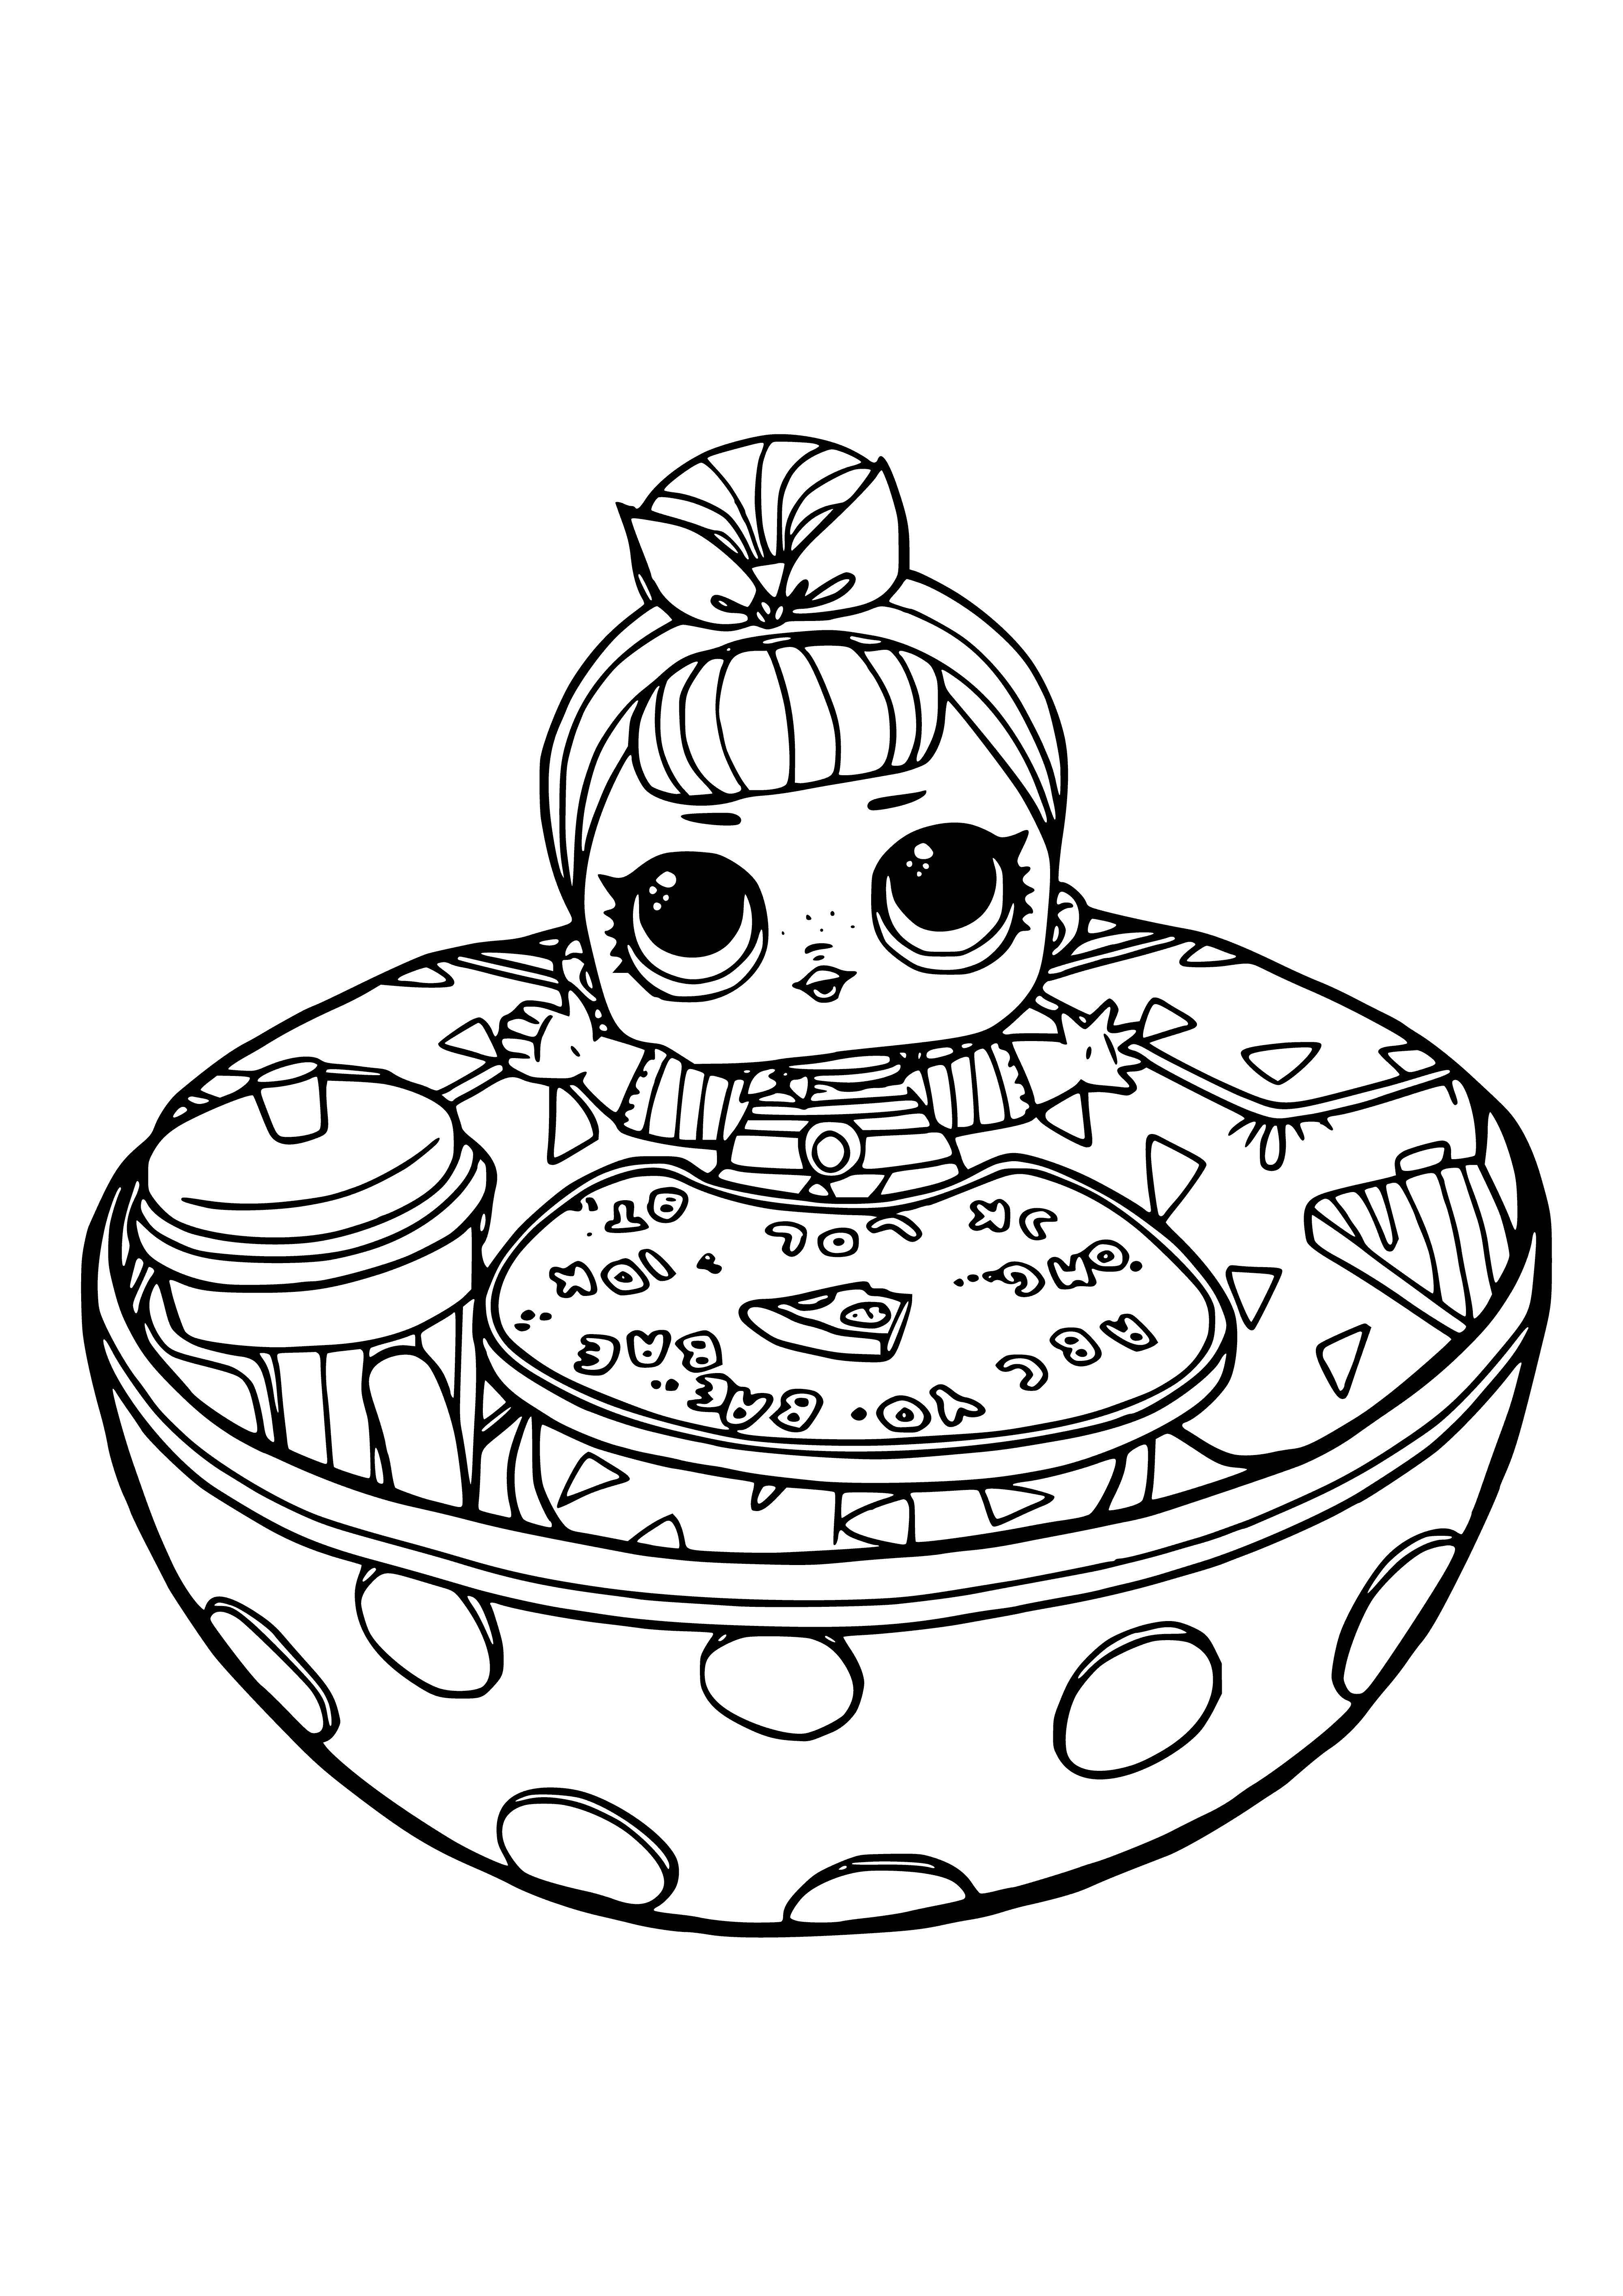 LOL baby in the ball coloring page